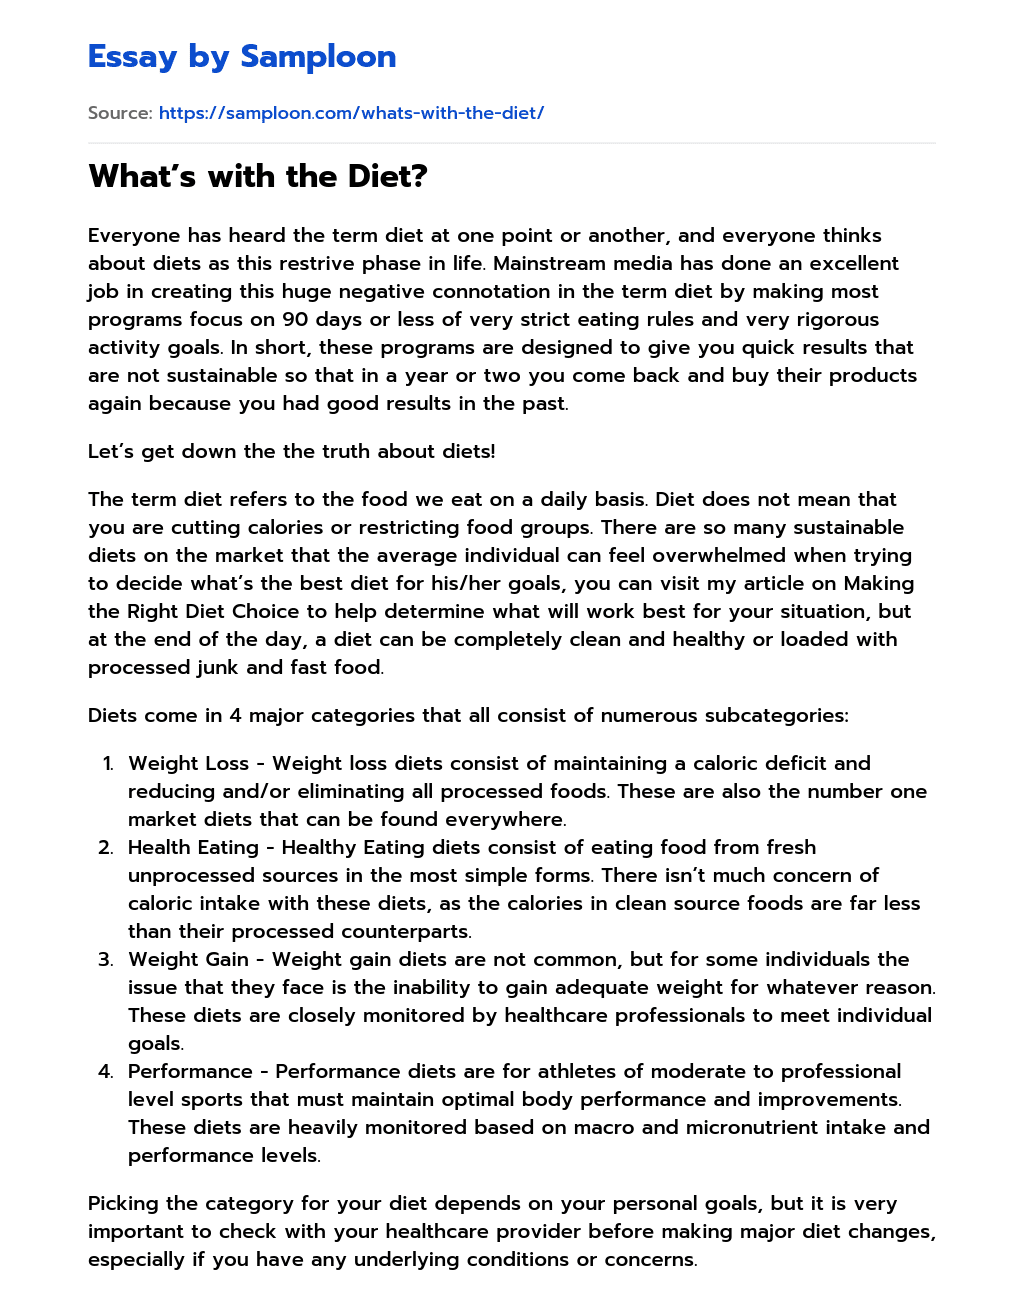 What’s with the Diet? essay